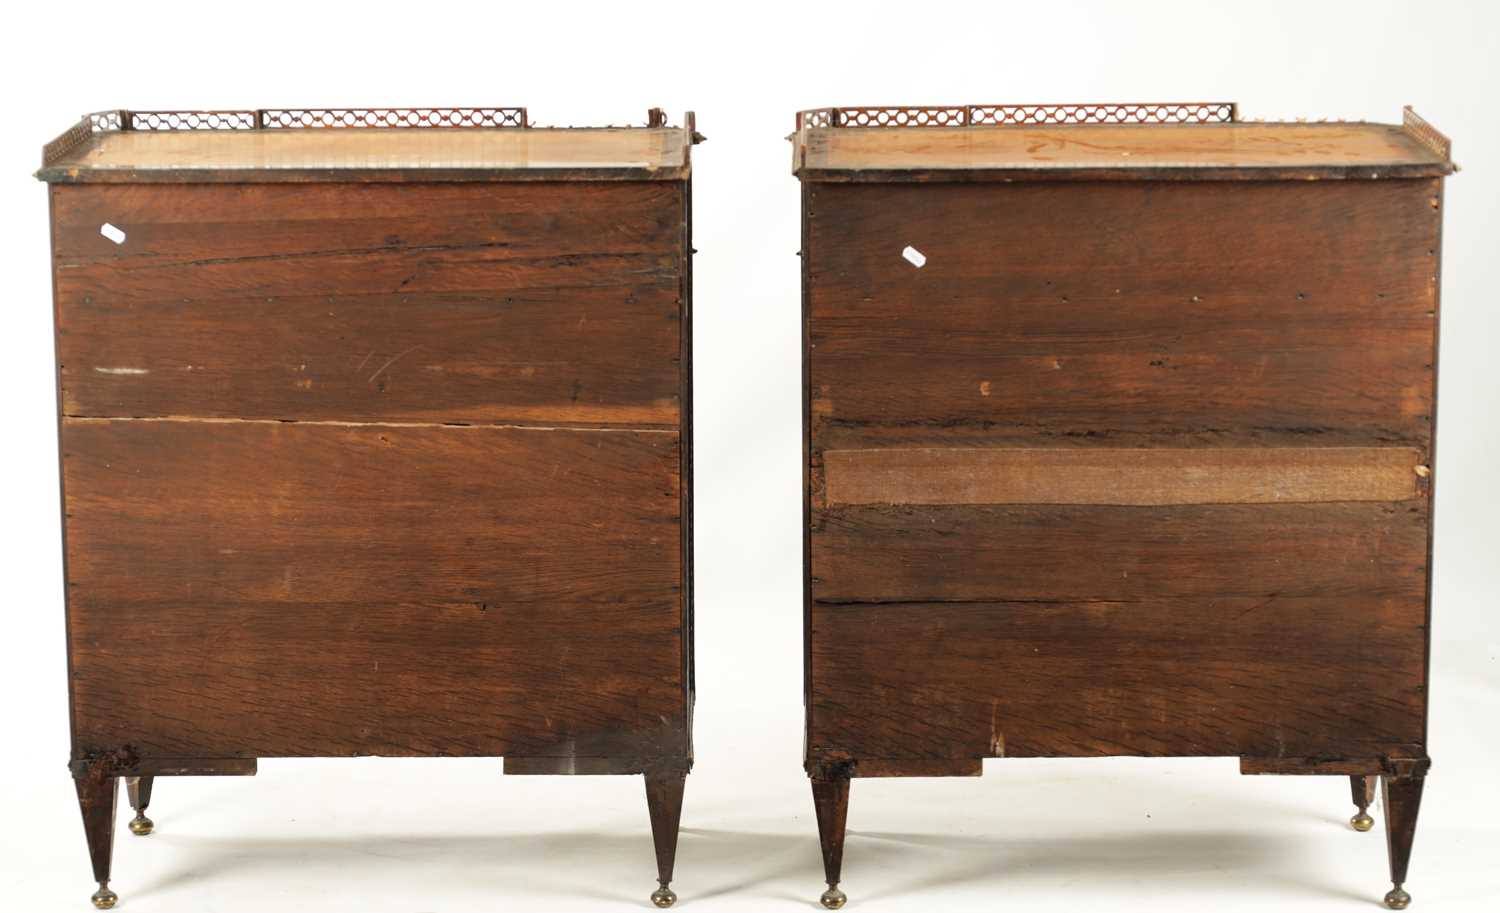 A FINE PAIR OF 18TH CENTURY CONTINENTAL SATINWOOD AND MAHOGANY LACQUERWORK AND INLAID SIDE CABINETS - Image 8 of 15